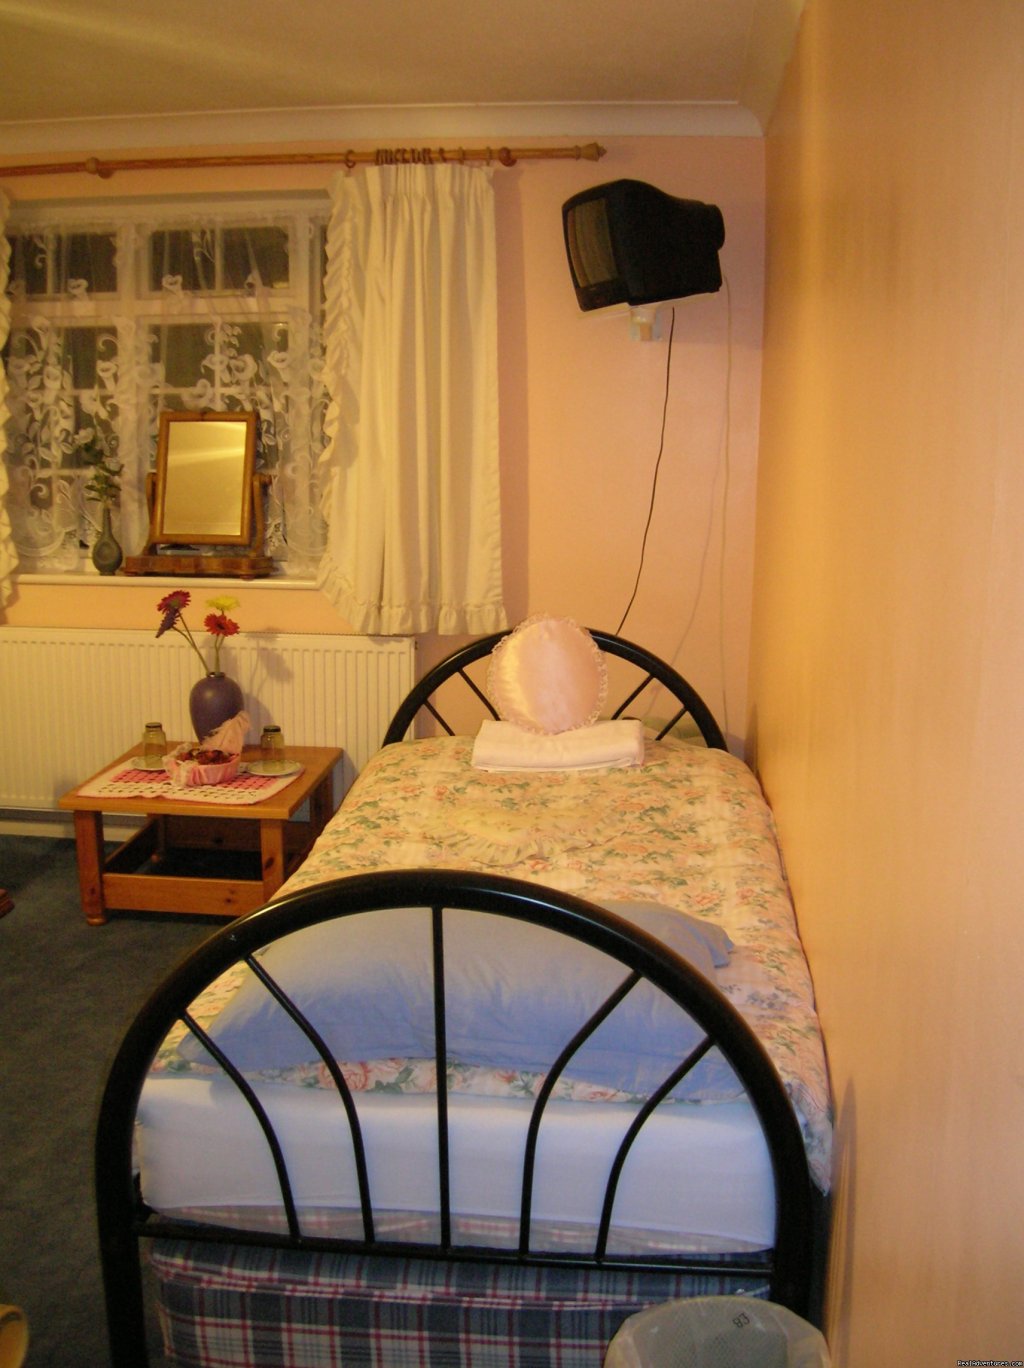 Single Room with private shower and wash | Beautiful Guest house / b&b near Gatwick airport | Image #4/7 | 